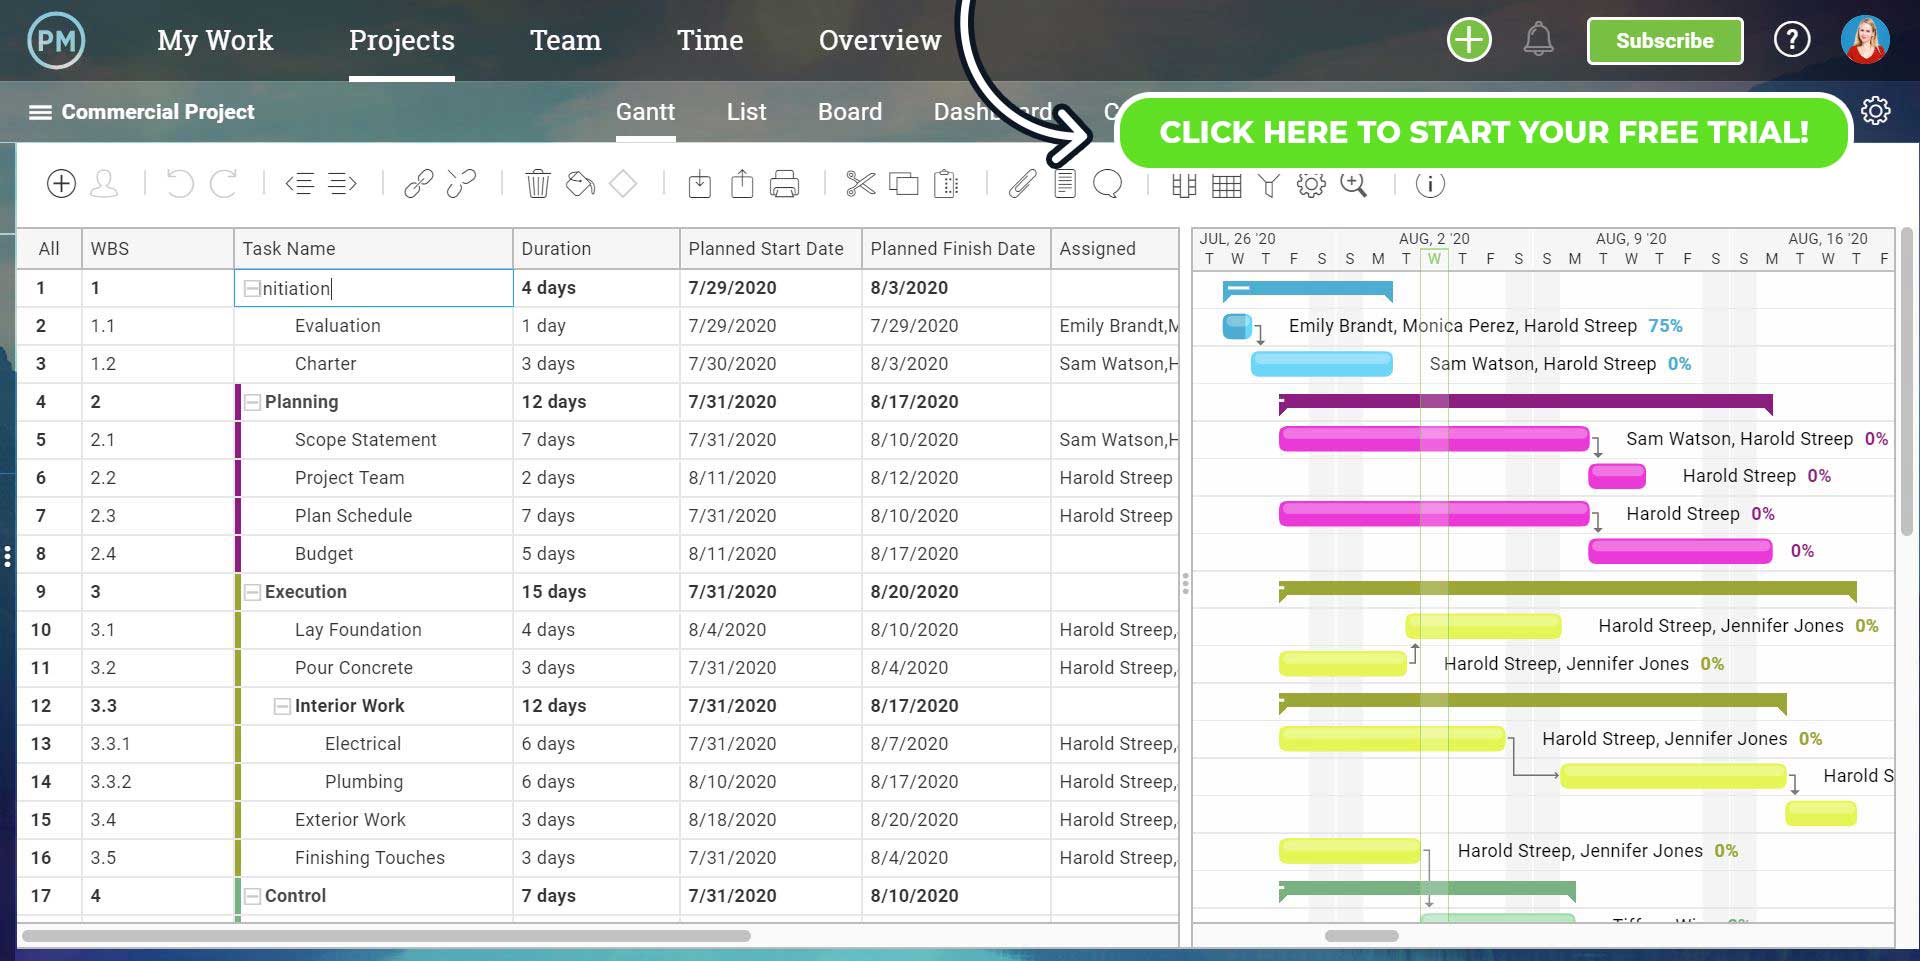 A screenshot of a work breakdown structure WBS created using Project Manager.com’s Gantt chart interface, with a WBS column on the left side displaying tasks.